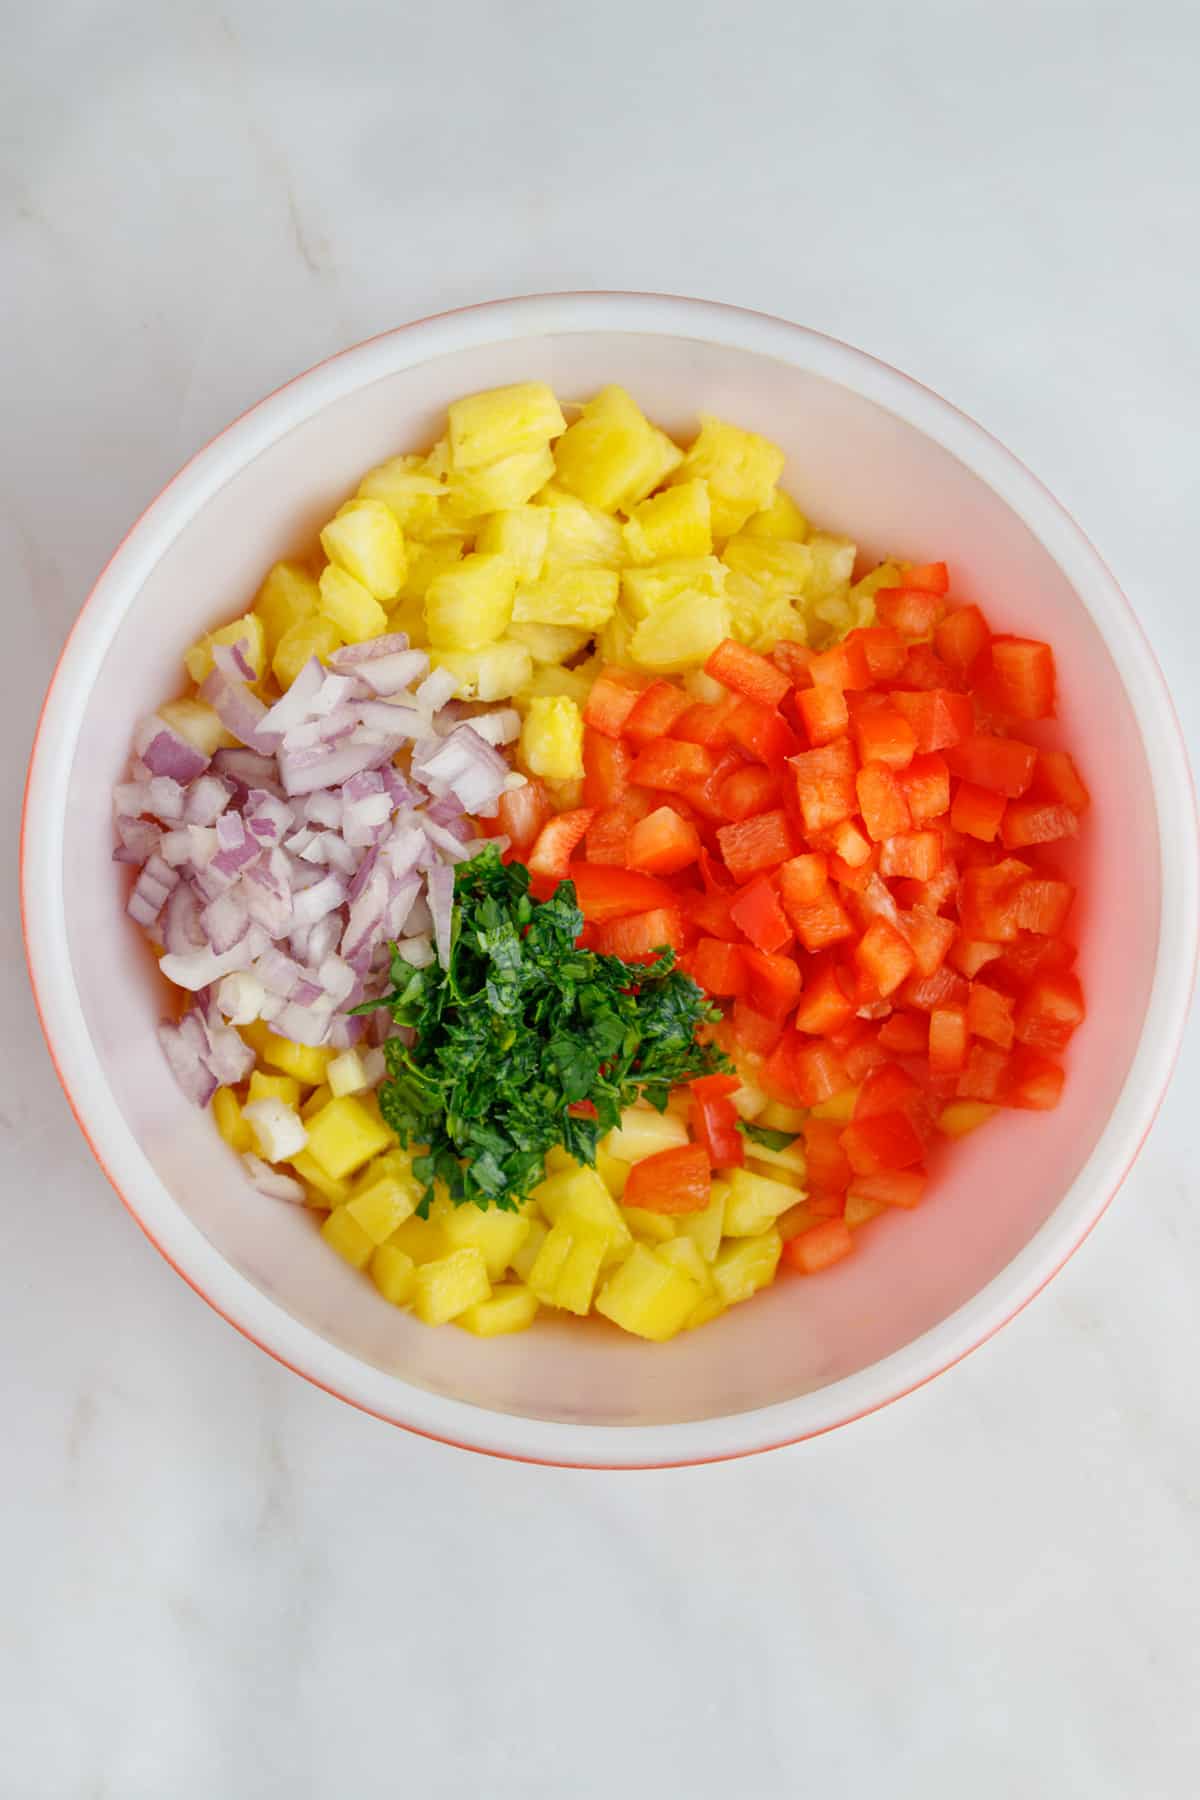 Diced mangos, pineapples, red bell pepper, red onions and cilantro in a bowl.